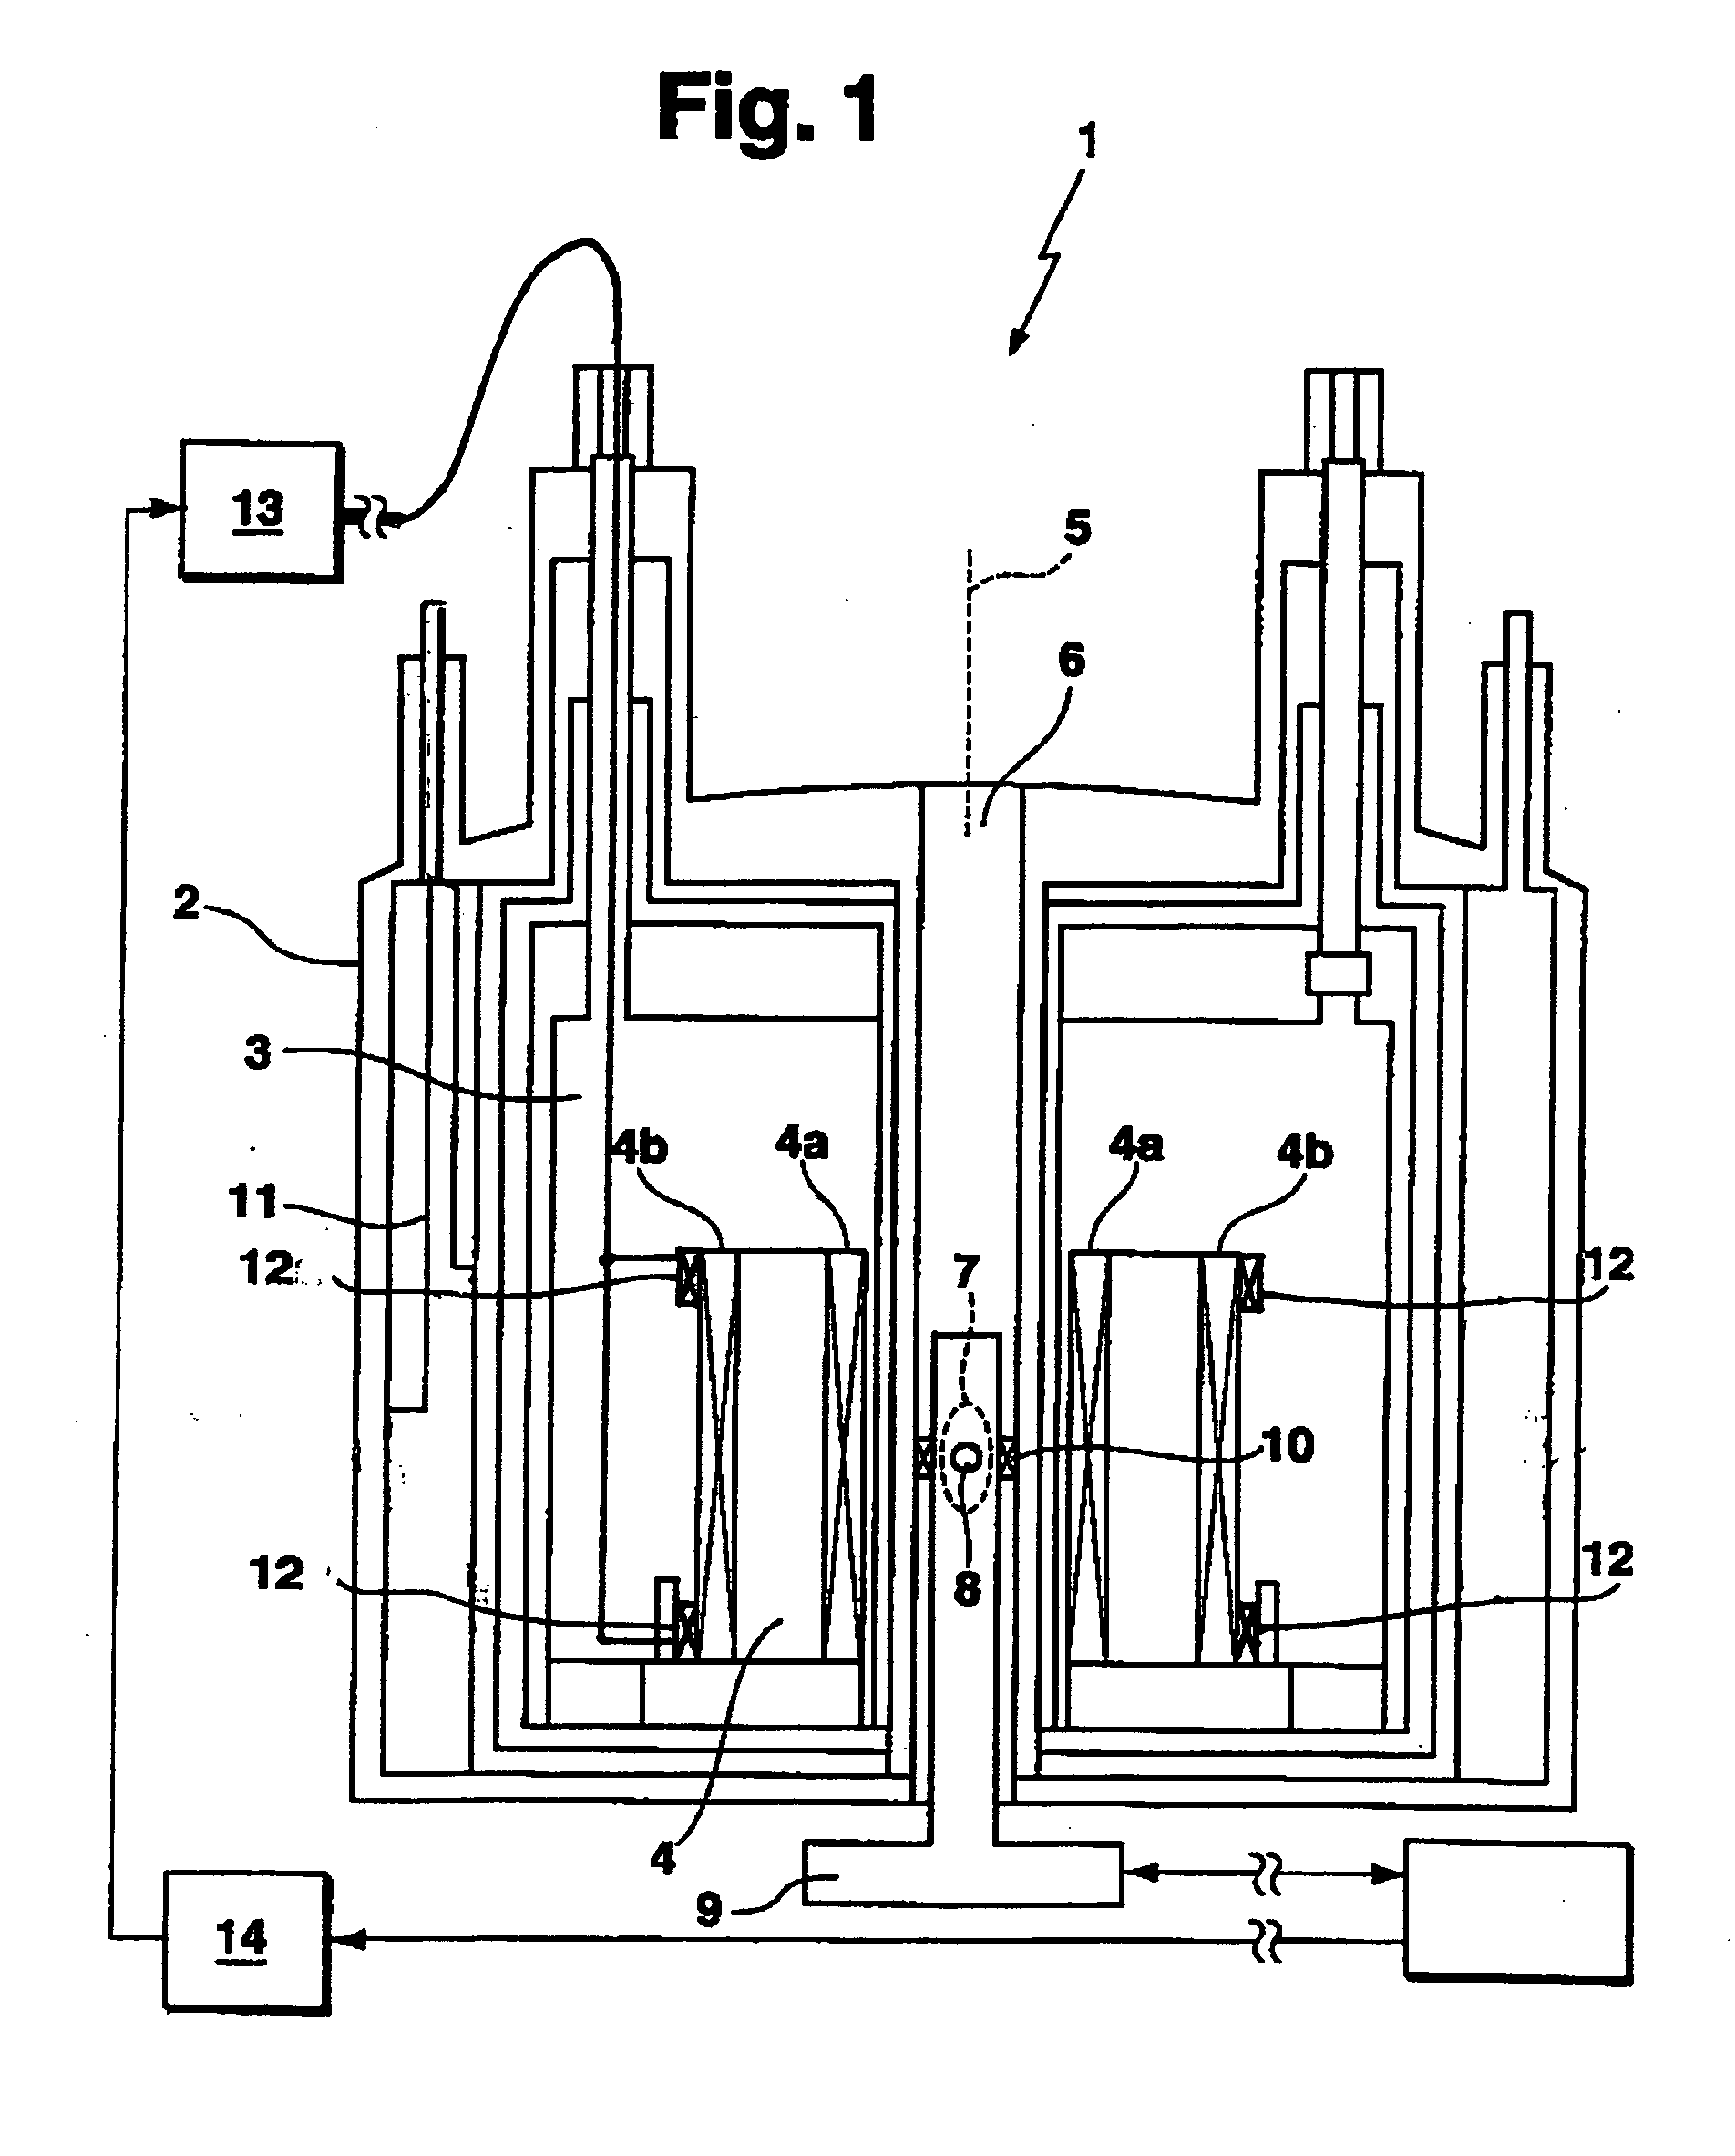 Superconducting magnet system with drift compensation